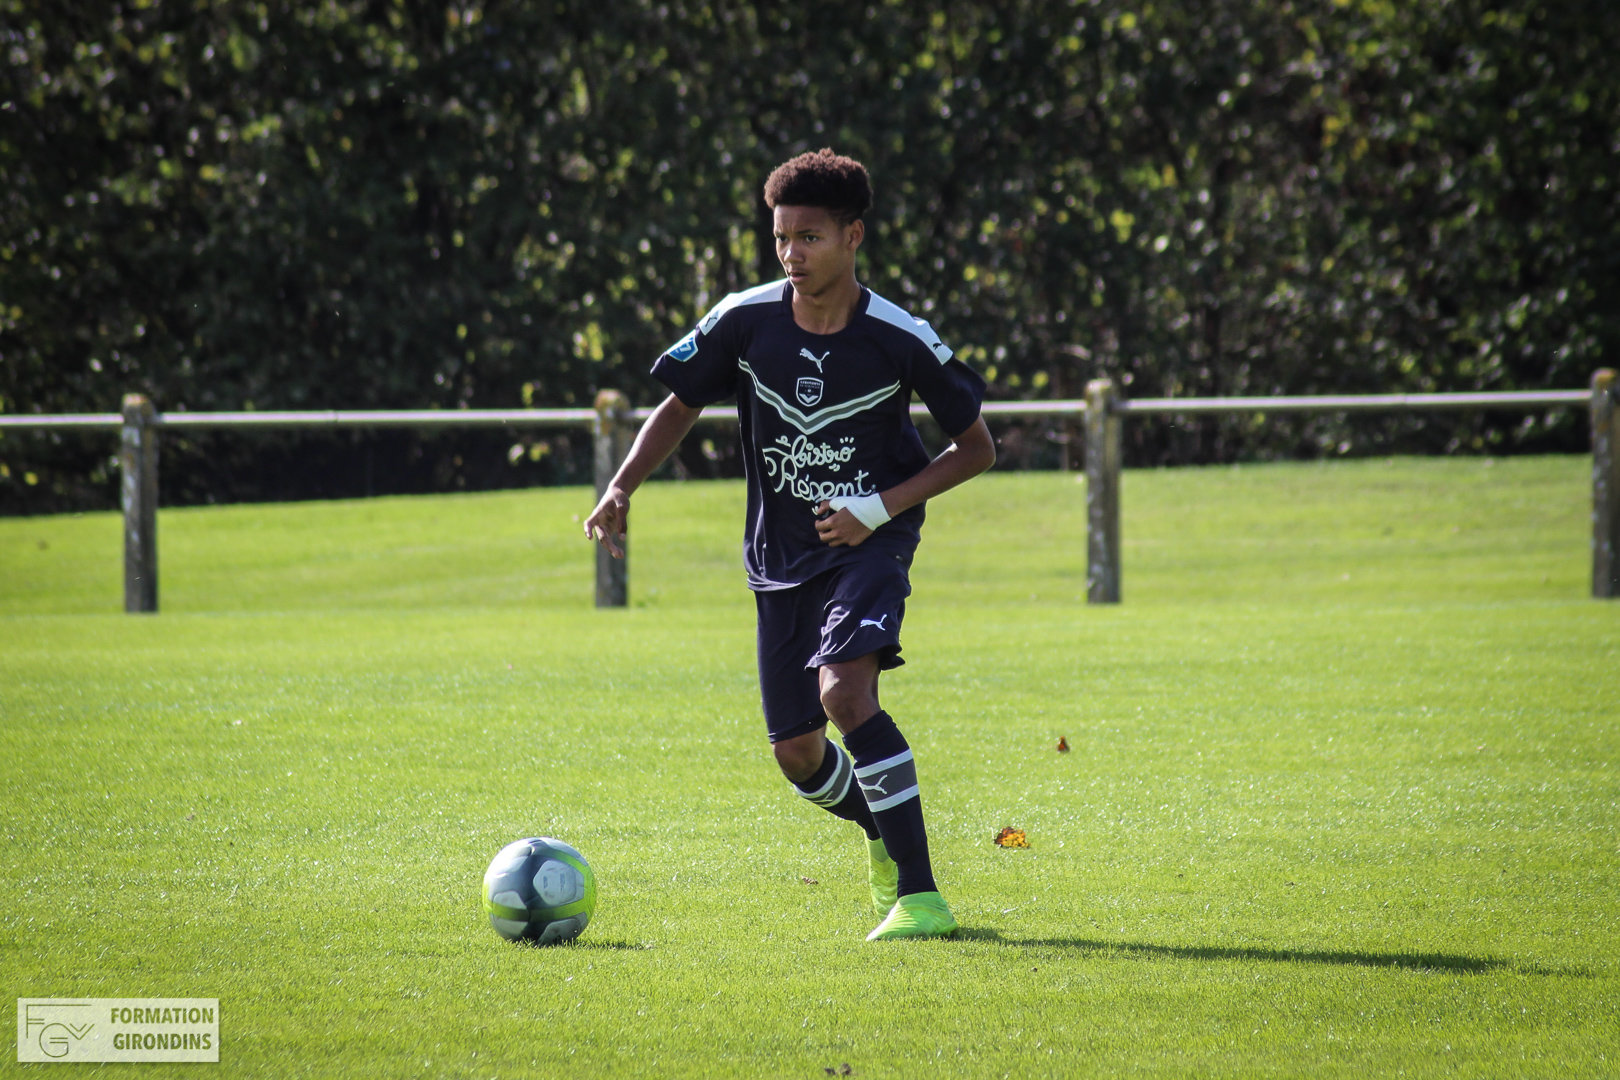 Cfa Girondins : Large victoire dans le derby - Formation Girondins 